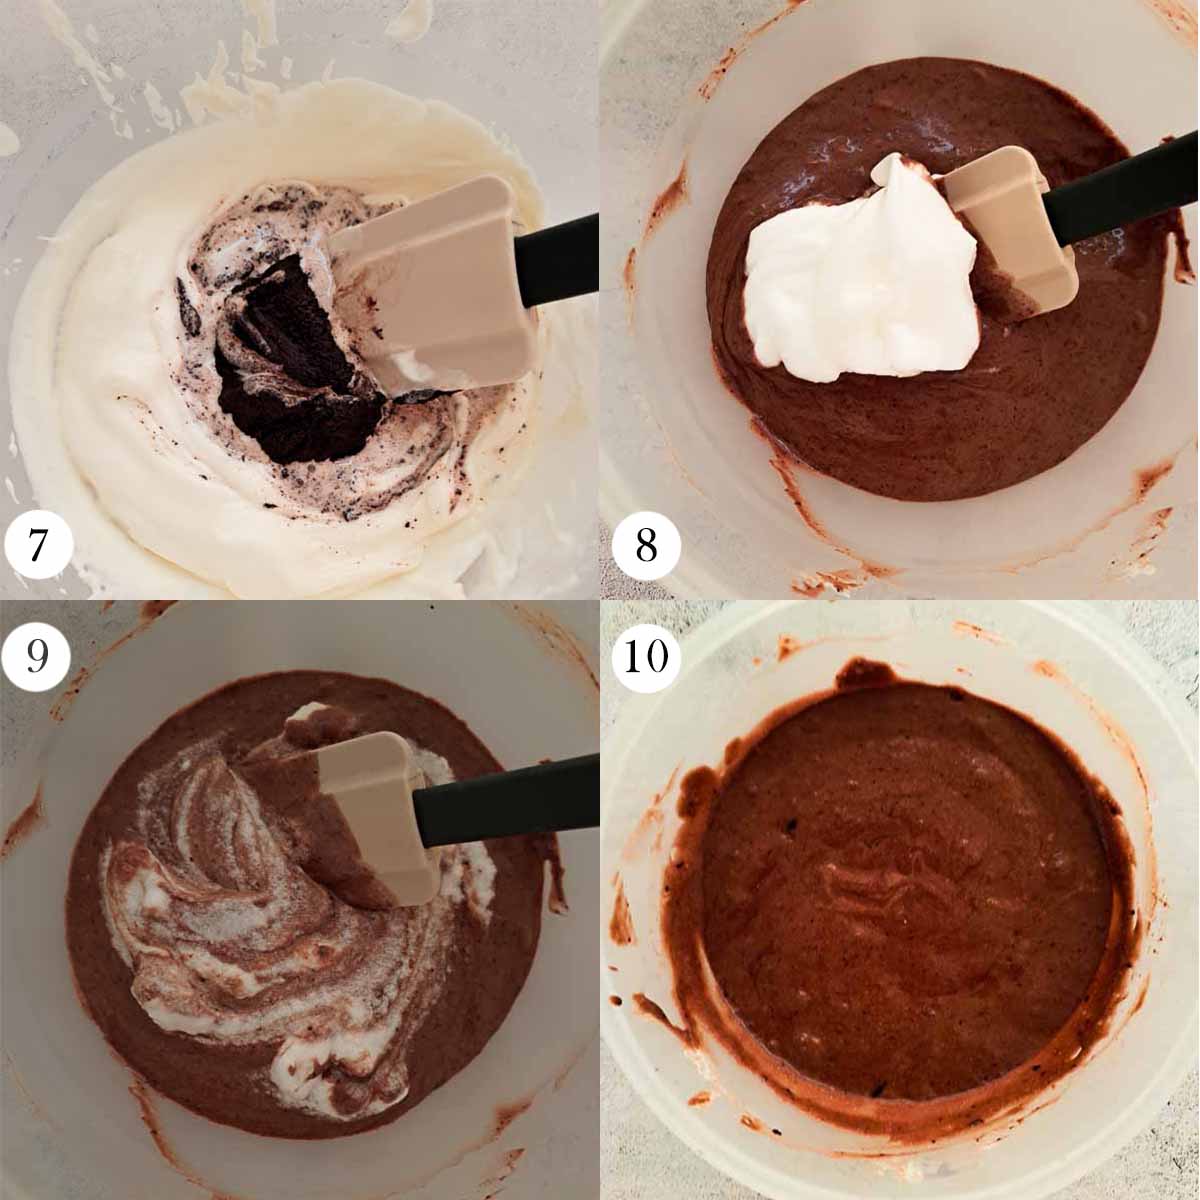 A collage of four photos showing how to make chocolate mousse by mixing melted chocolate with whipped cream, then dolding in whisked egg whites, ans the final mousse before leaving it to set in the fridge. The photos are numbered from 7 to 10, from top left to bottom right.